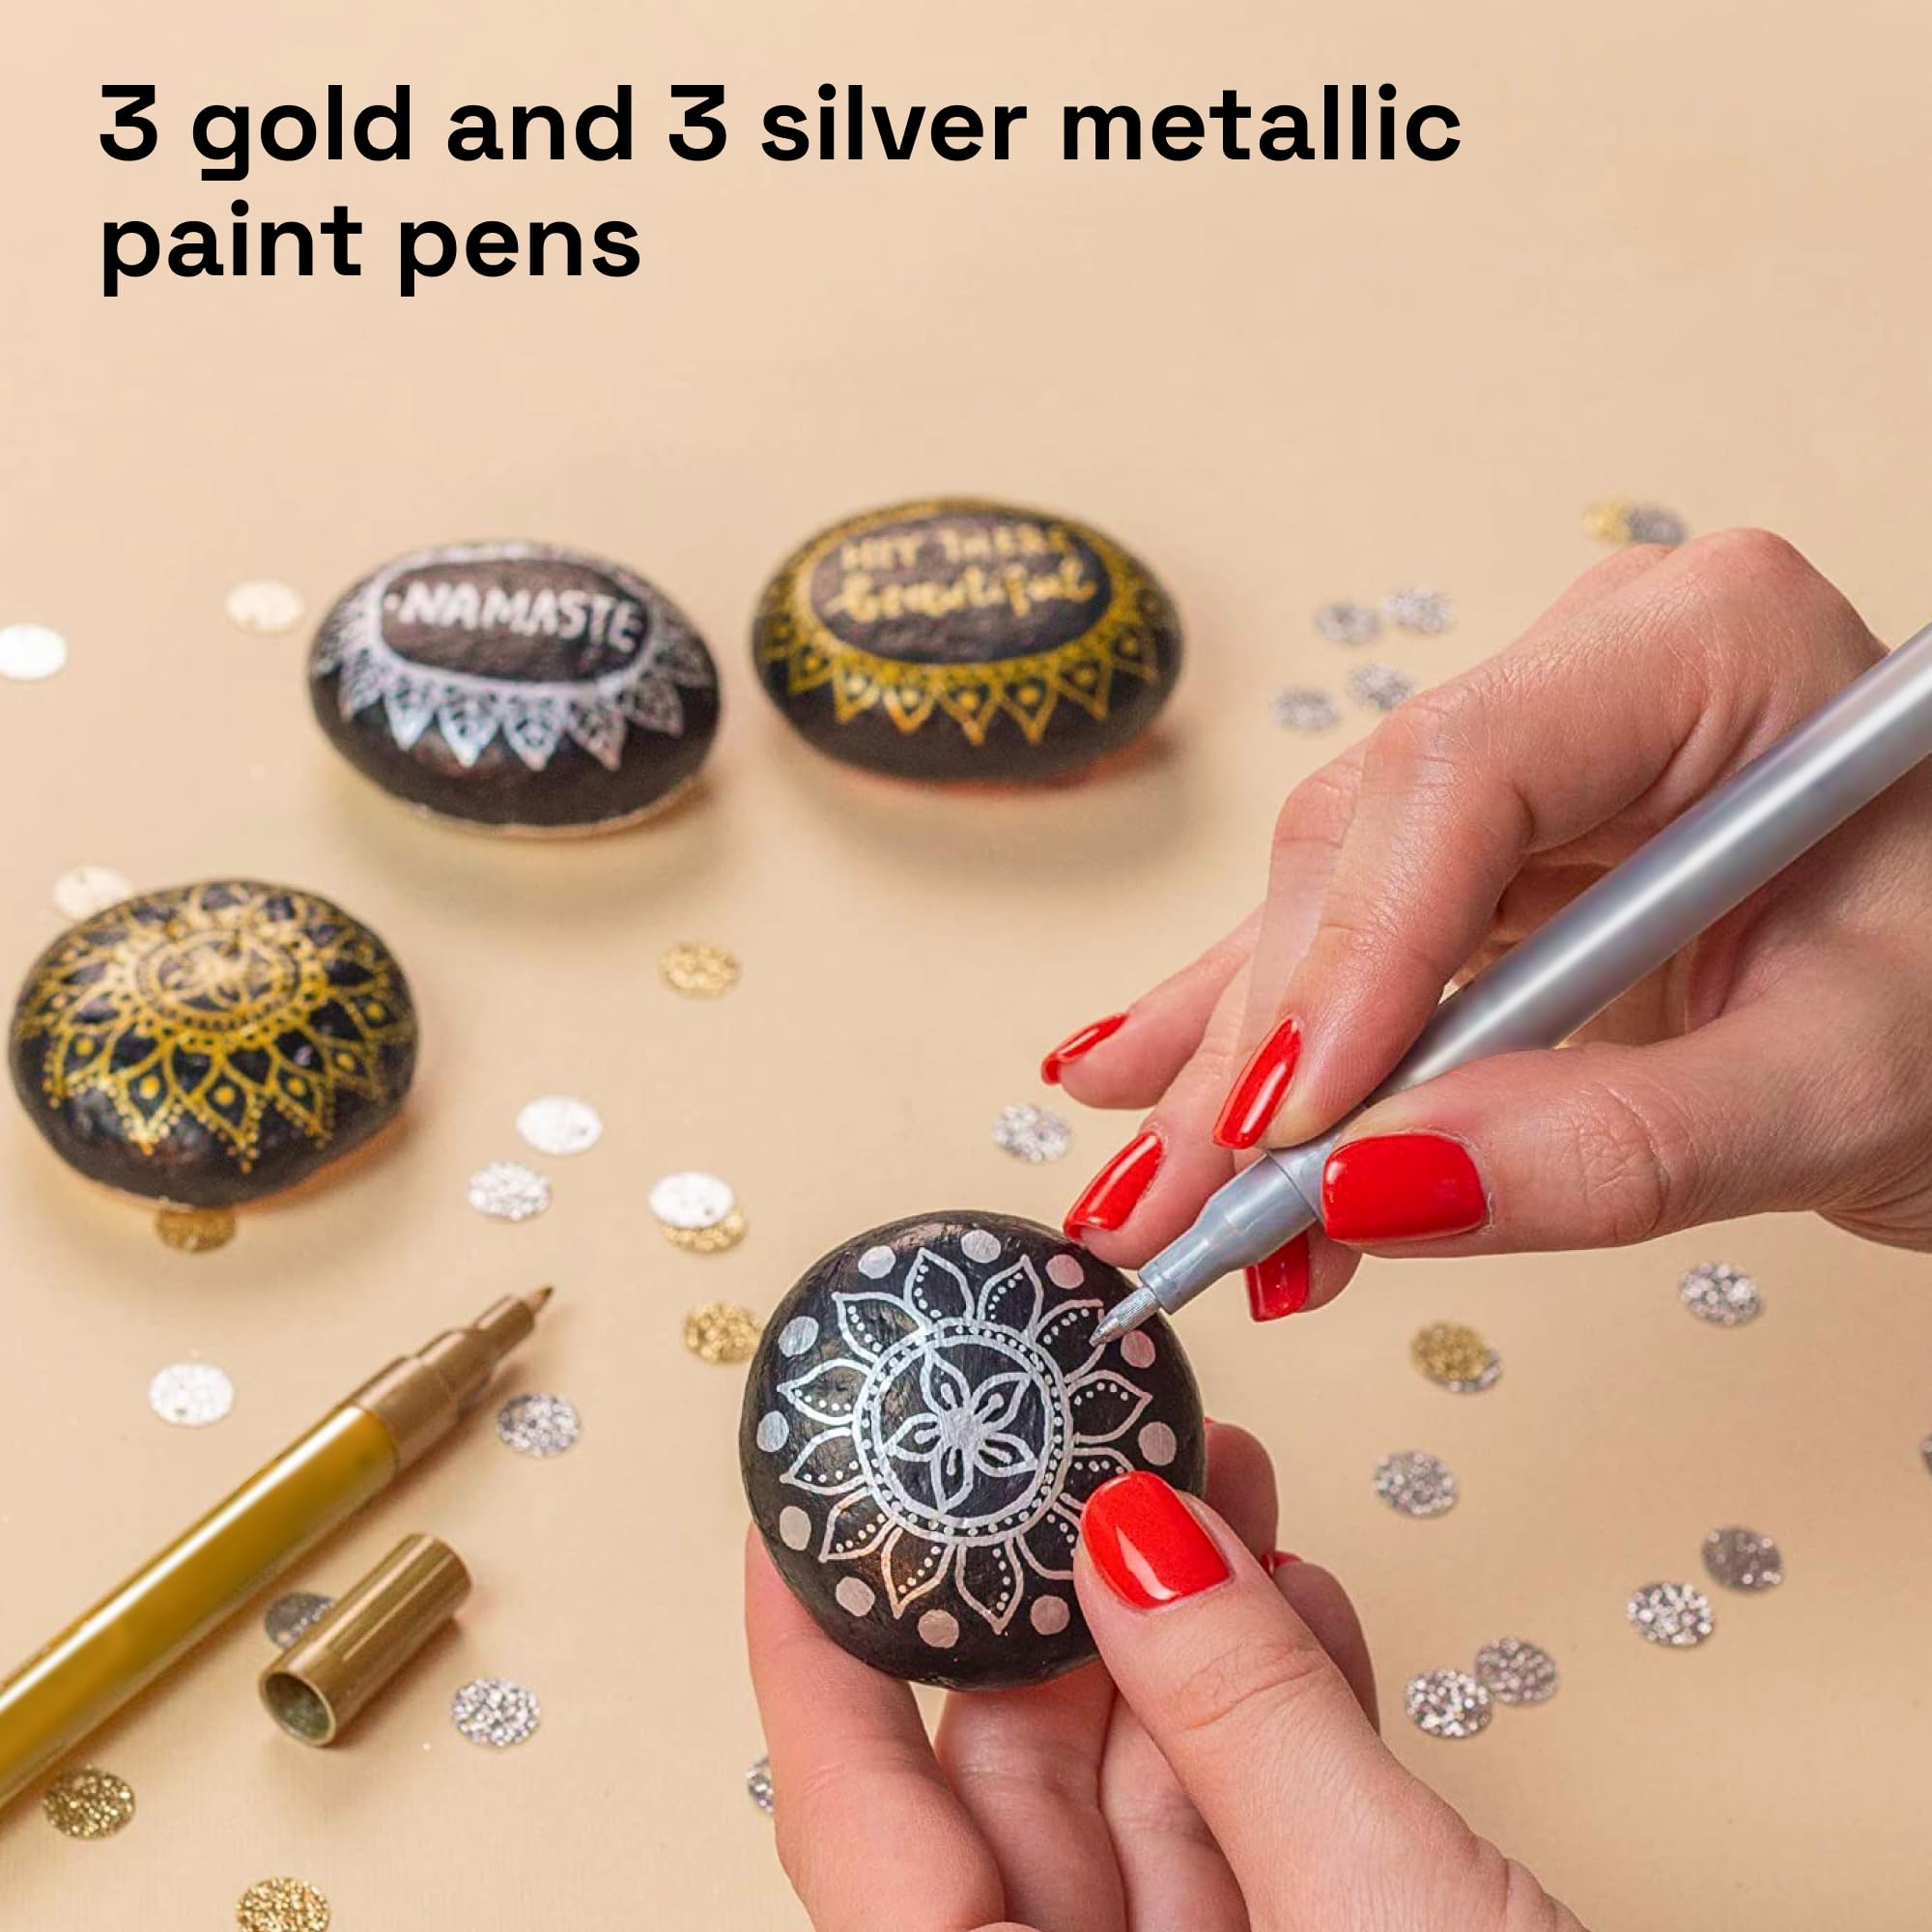 Metallic Acrylic Paint Pens for Rock Painting, Stone, Ceramic, Glass, Wood, Fabric, Canvas, Metal, Scrapbooking (6 Pack) Set of 3 Gold & 3 Silver Acrylic Paint Markers Water-Based Extra-Fine Tip 0.7mm